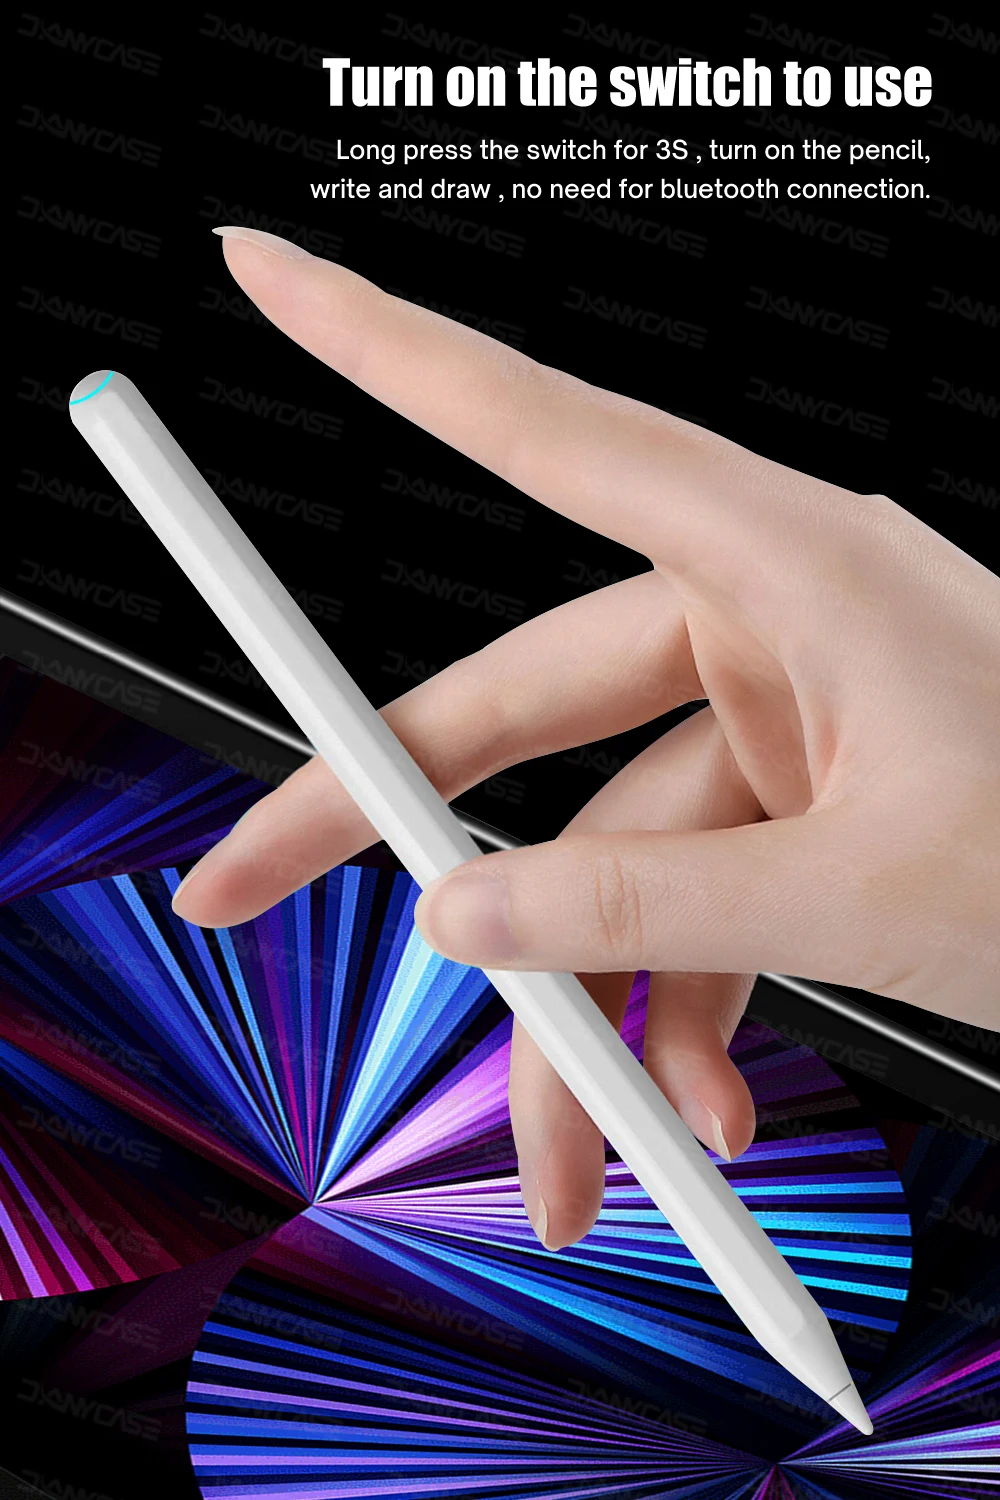 For Apple Pencil 2 1 with Wireless Pairing Charging iPad Air 4 5 Pro 11 12.9 Mini 6 for iPad Pencil Palm Rejection Tilt Stylus tablet pillow pad